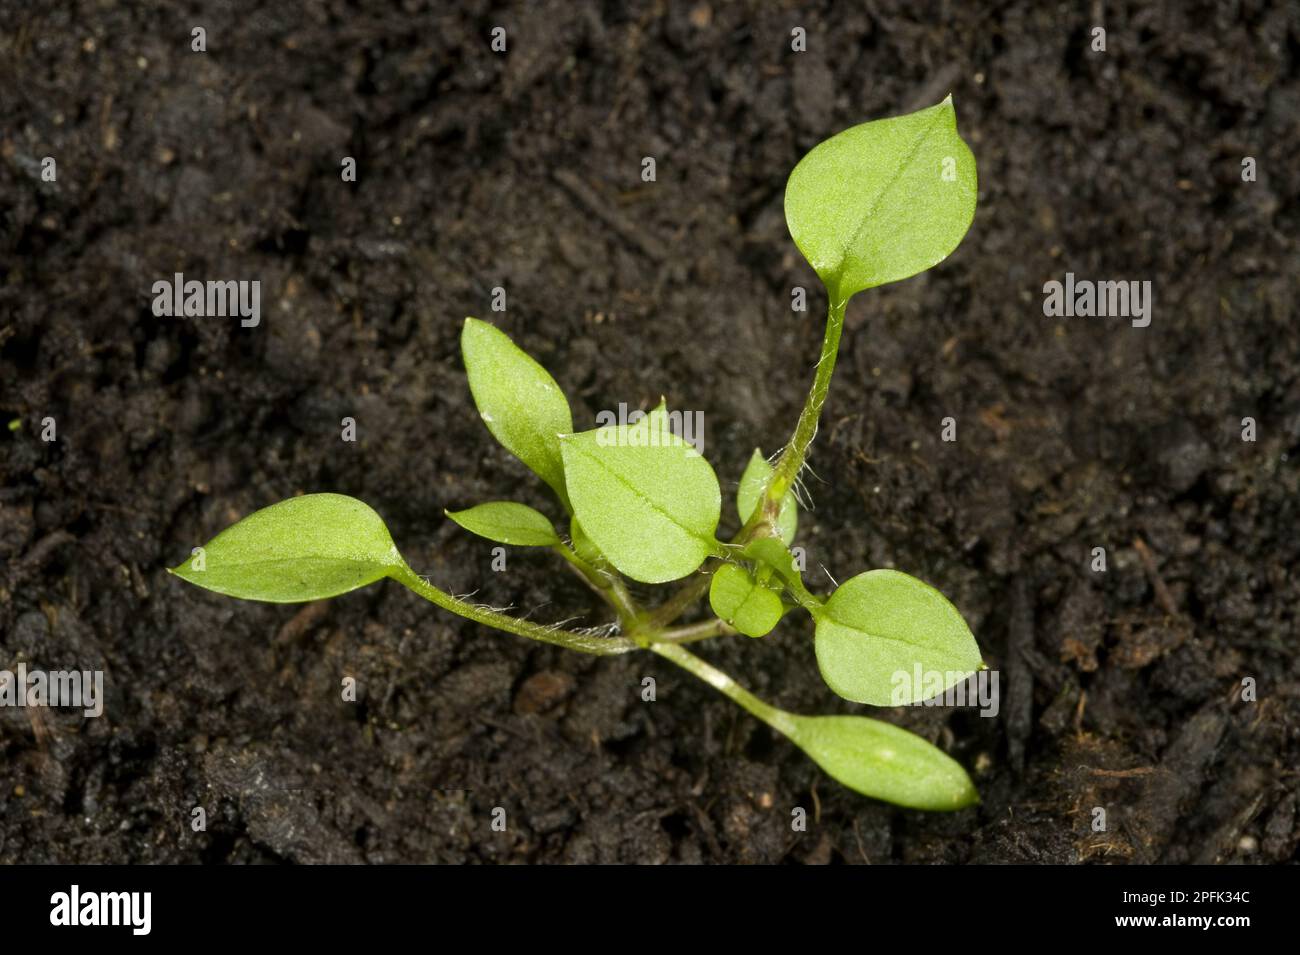 Seedling developing into a young plant of chickweed (Stellaria media), an annual agricultural and garden weed Stock Photo